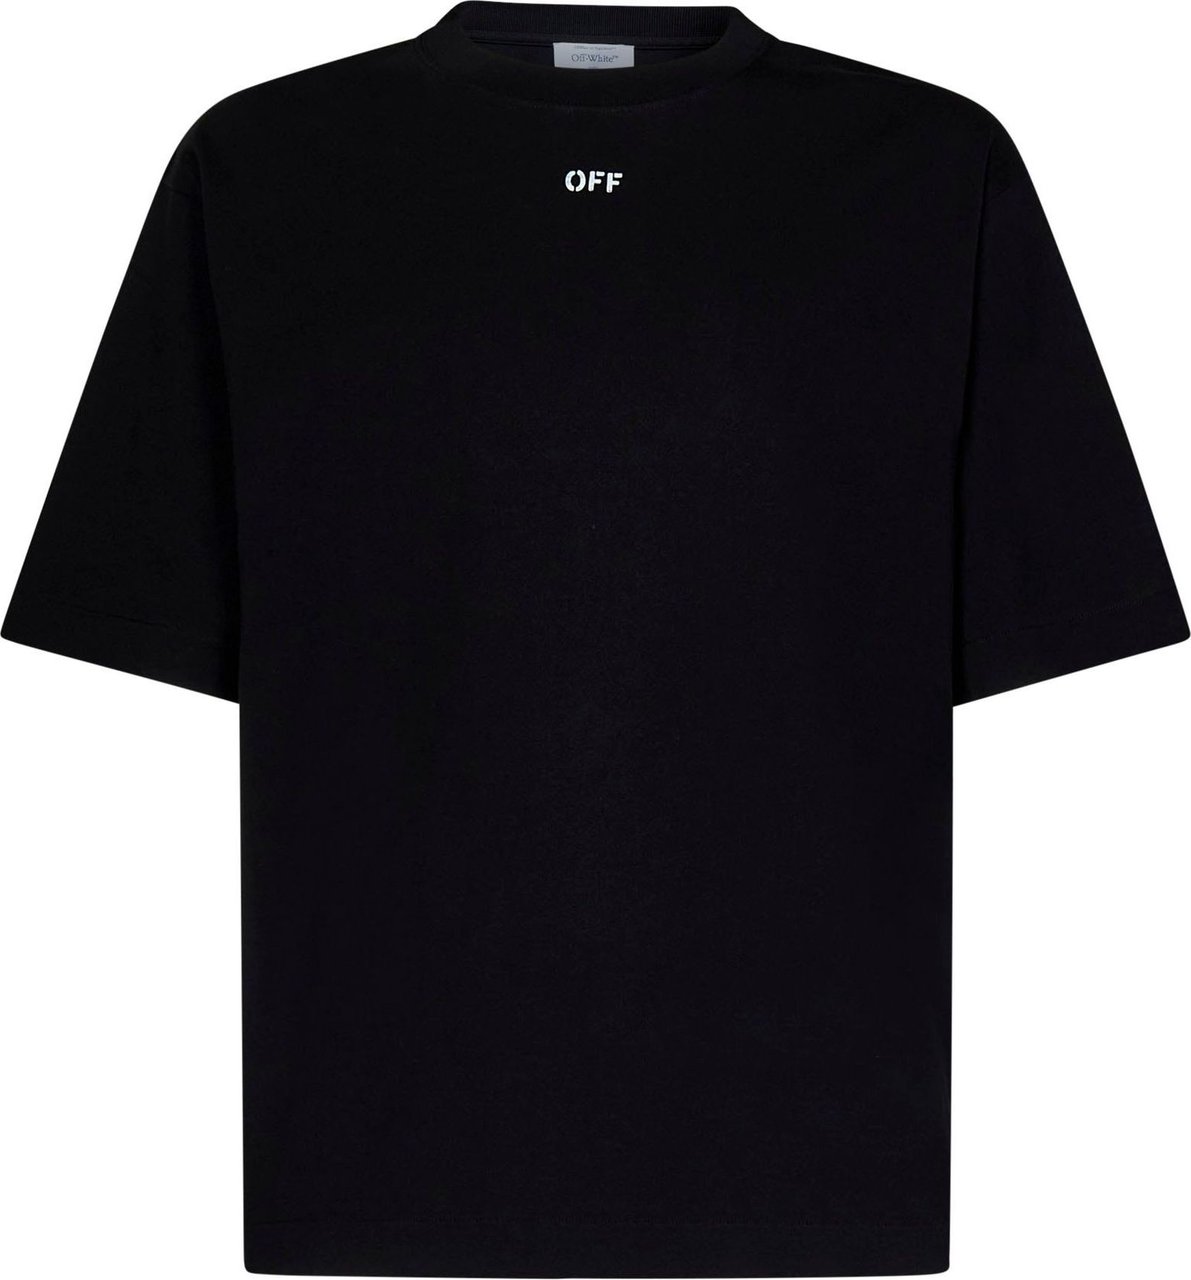 OFF-WHITE Off Stamp Skate S/S Tee | WINTER SALE €171,- (-40%)